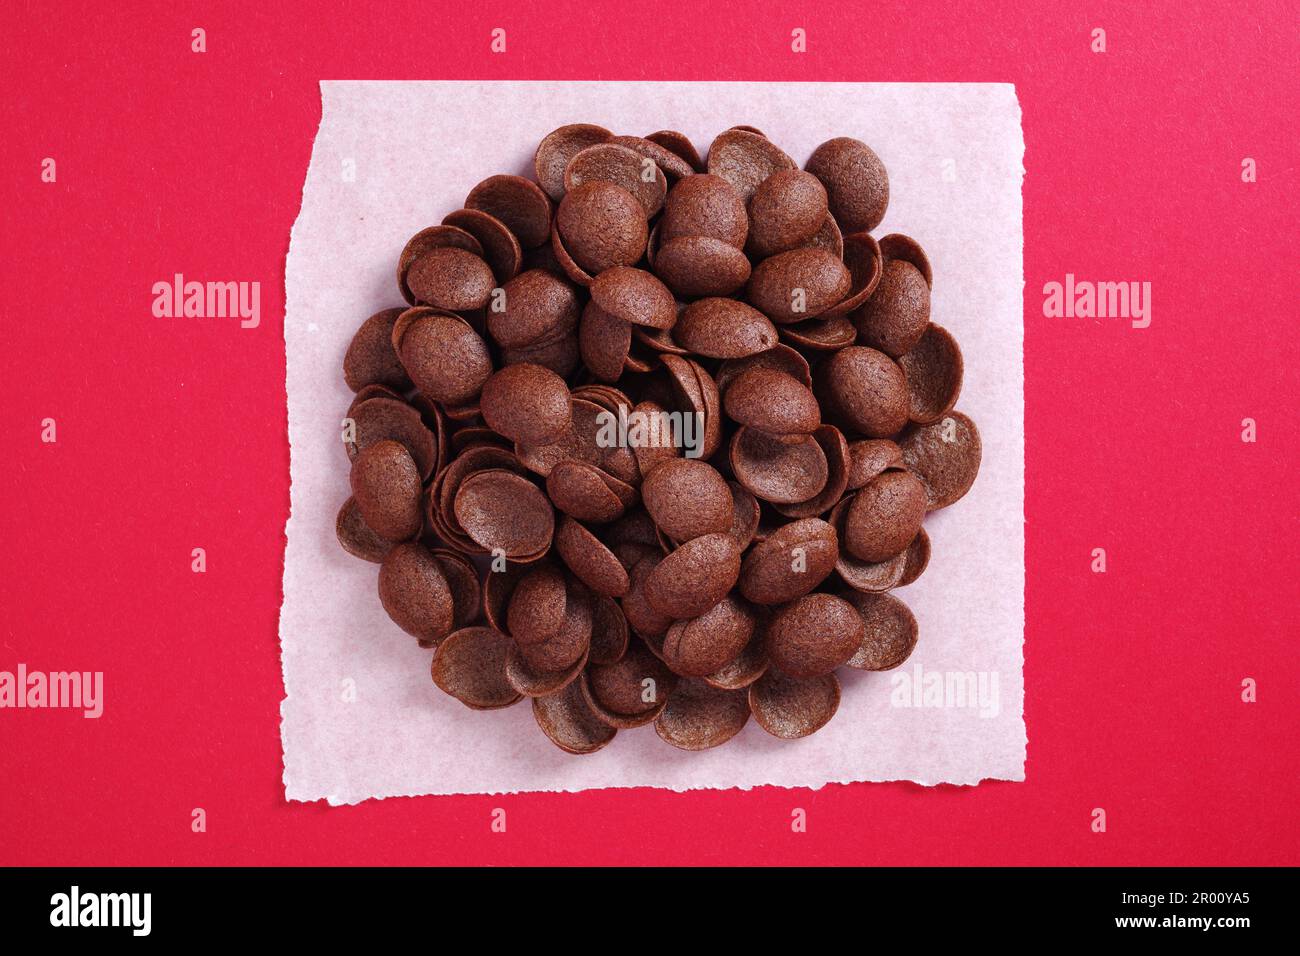 Chocolate cereals breakfast on red background. Glazed shells. Top view Stock Photo